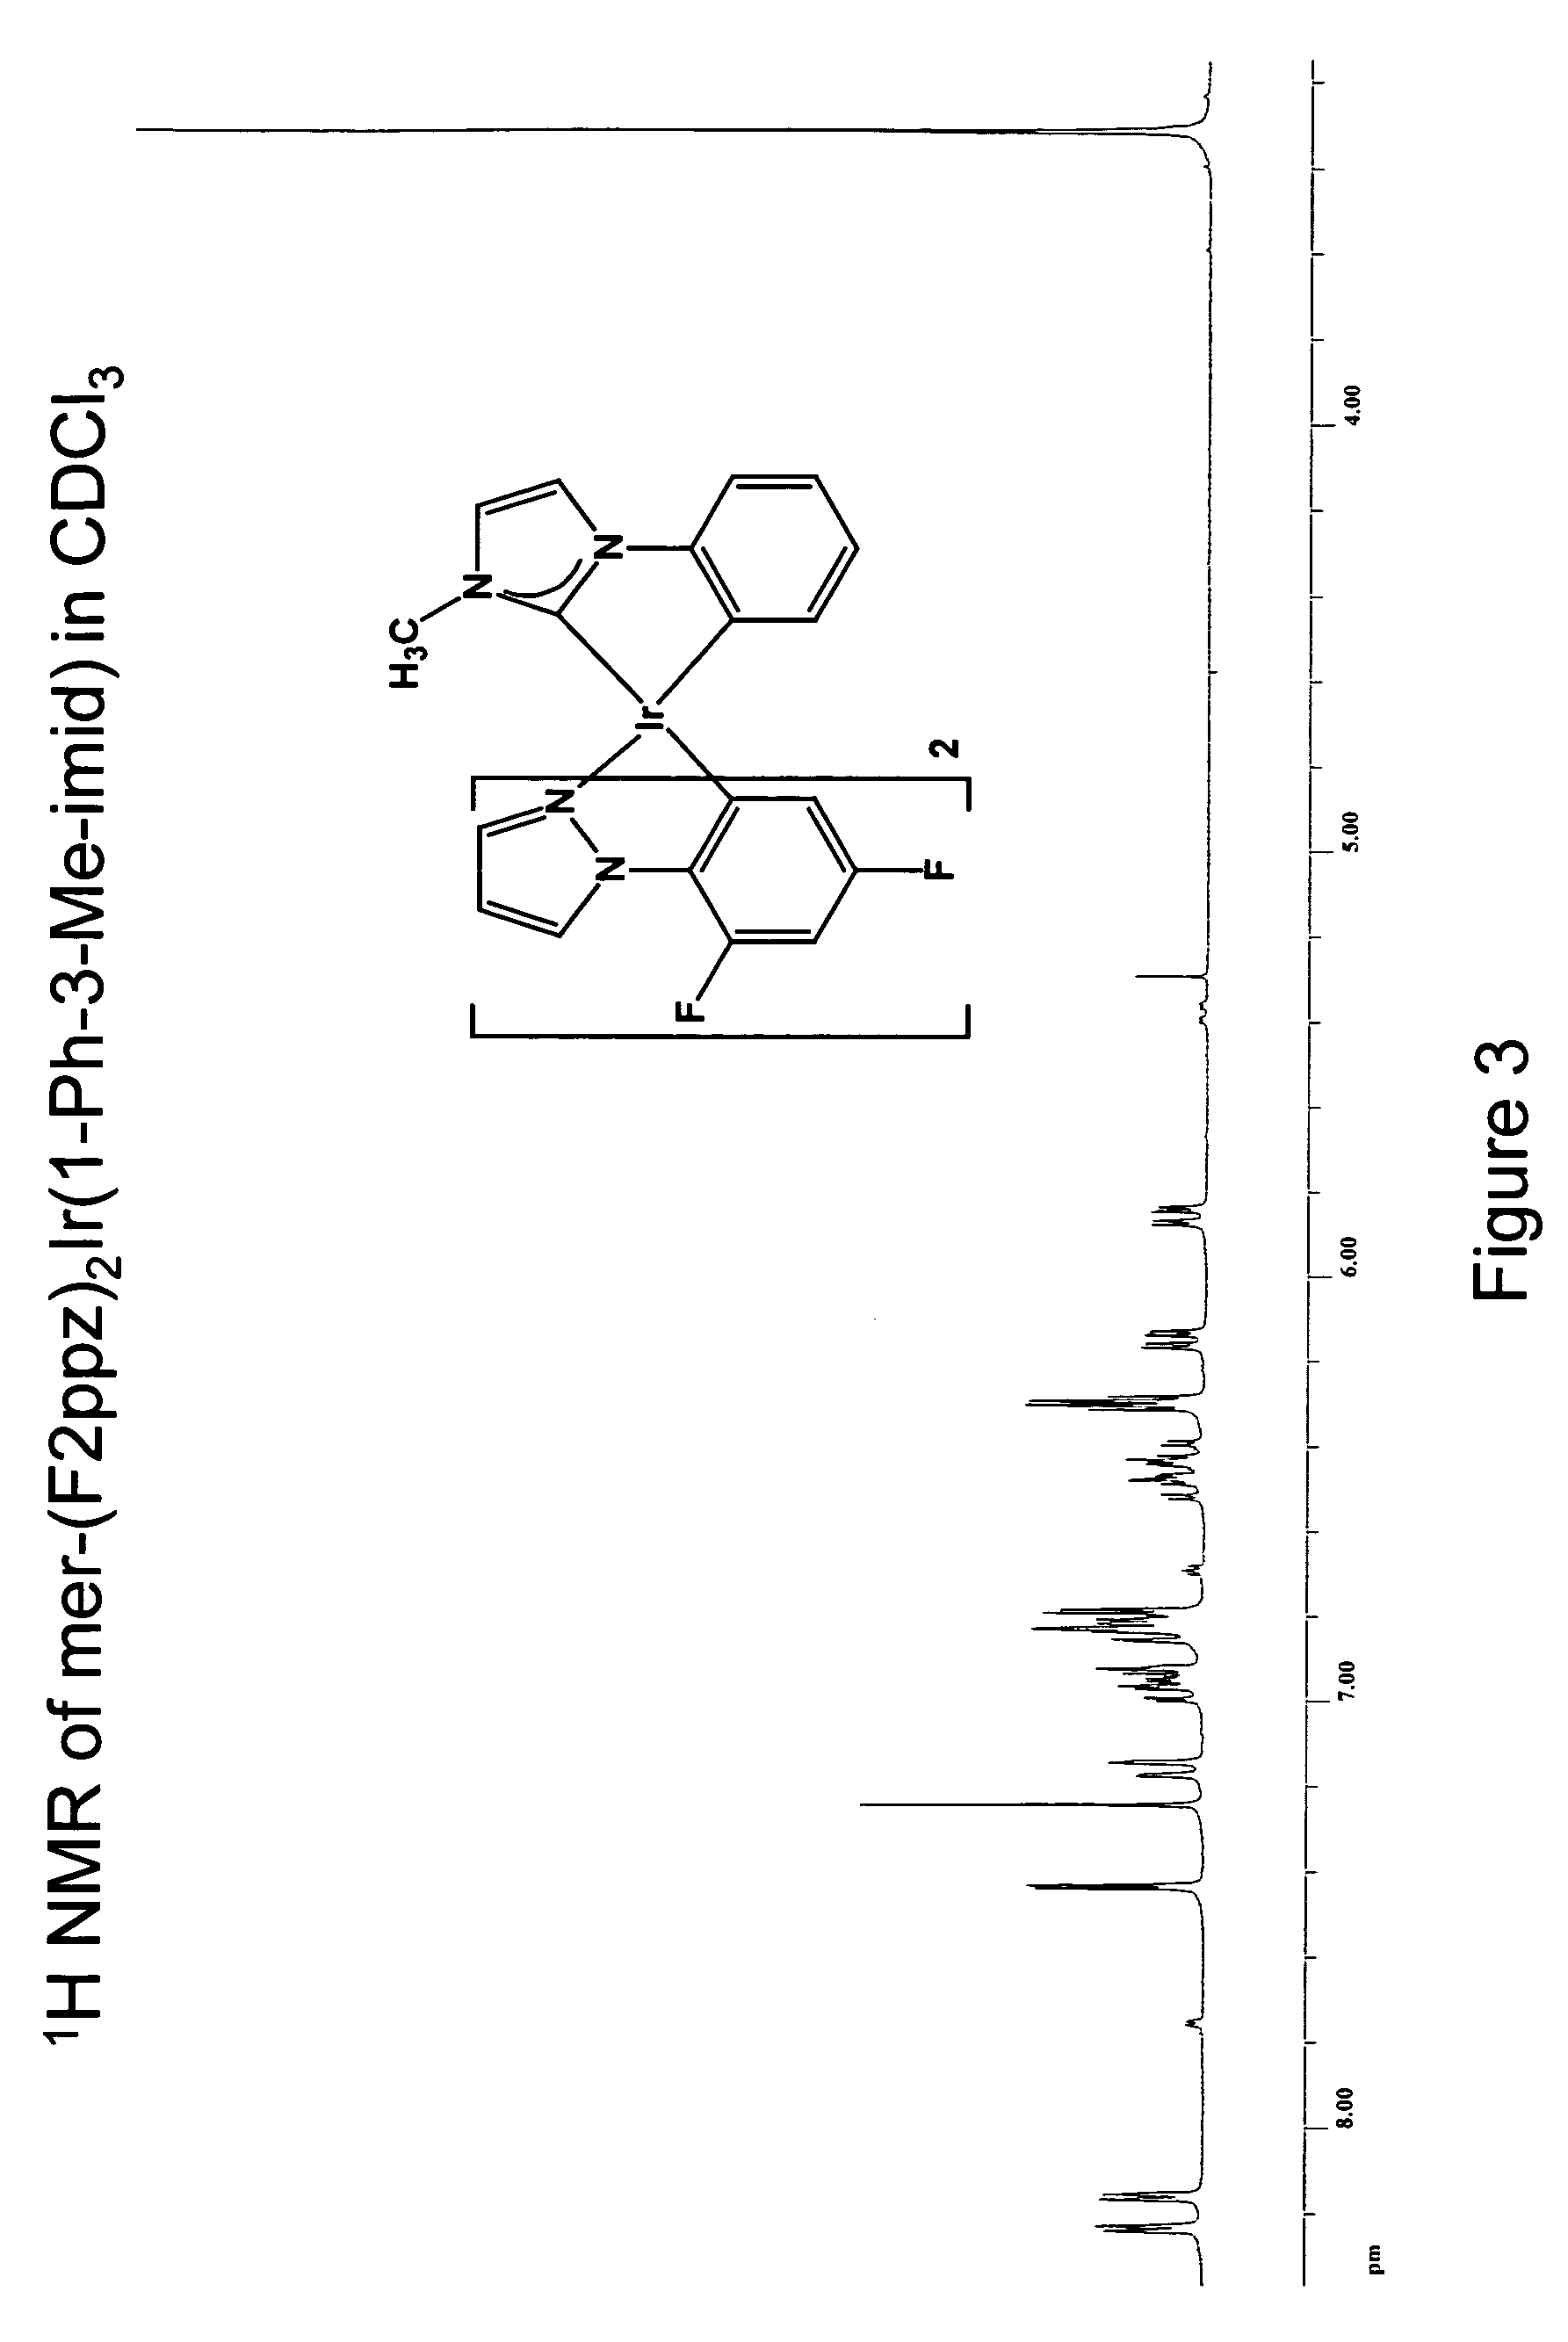 Luminescent compounds with carbene ligands